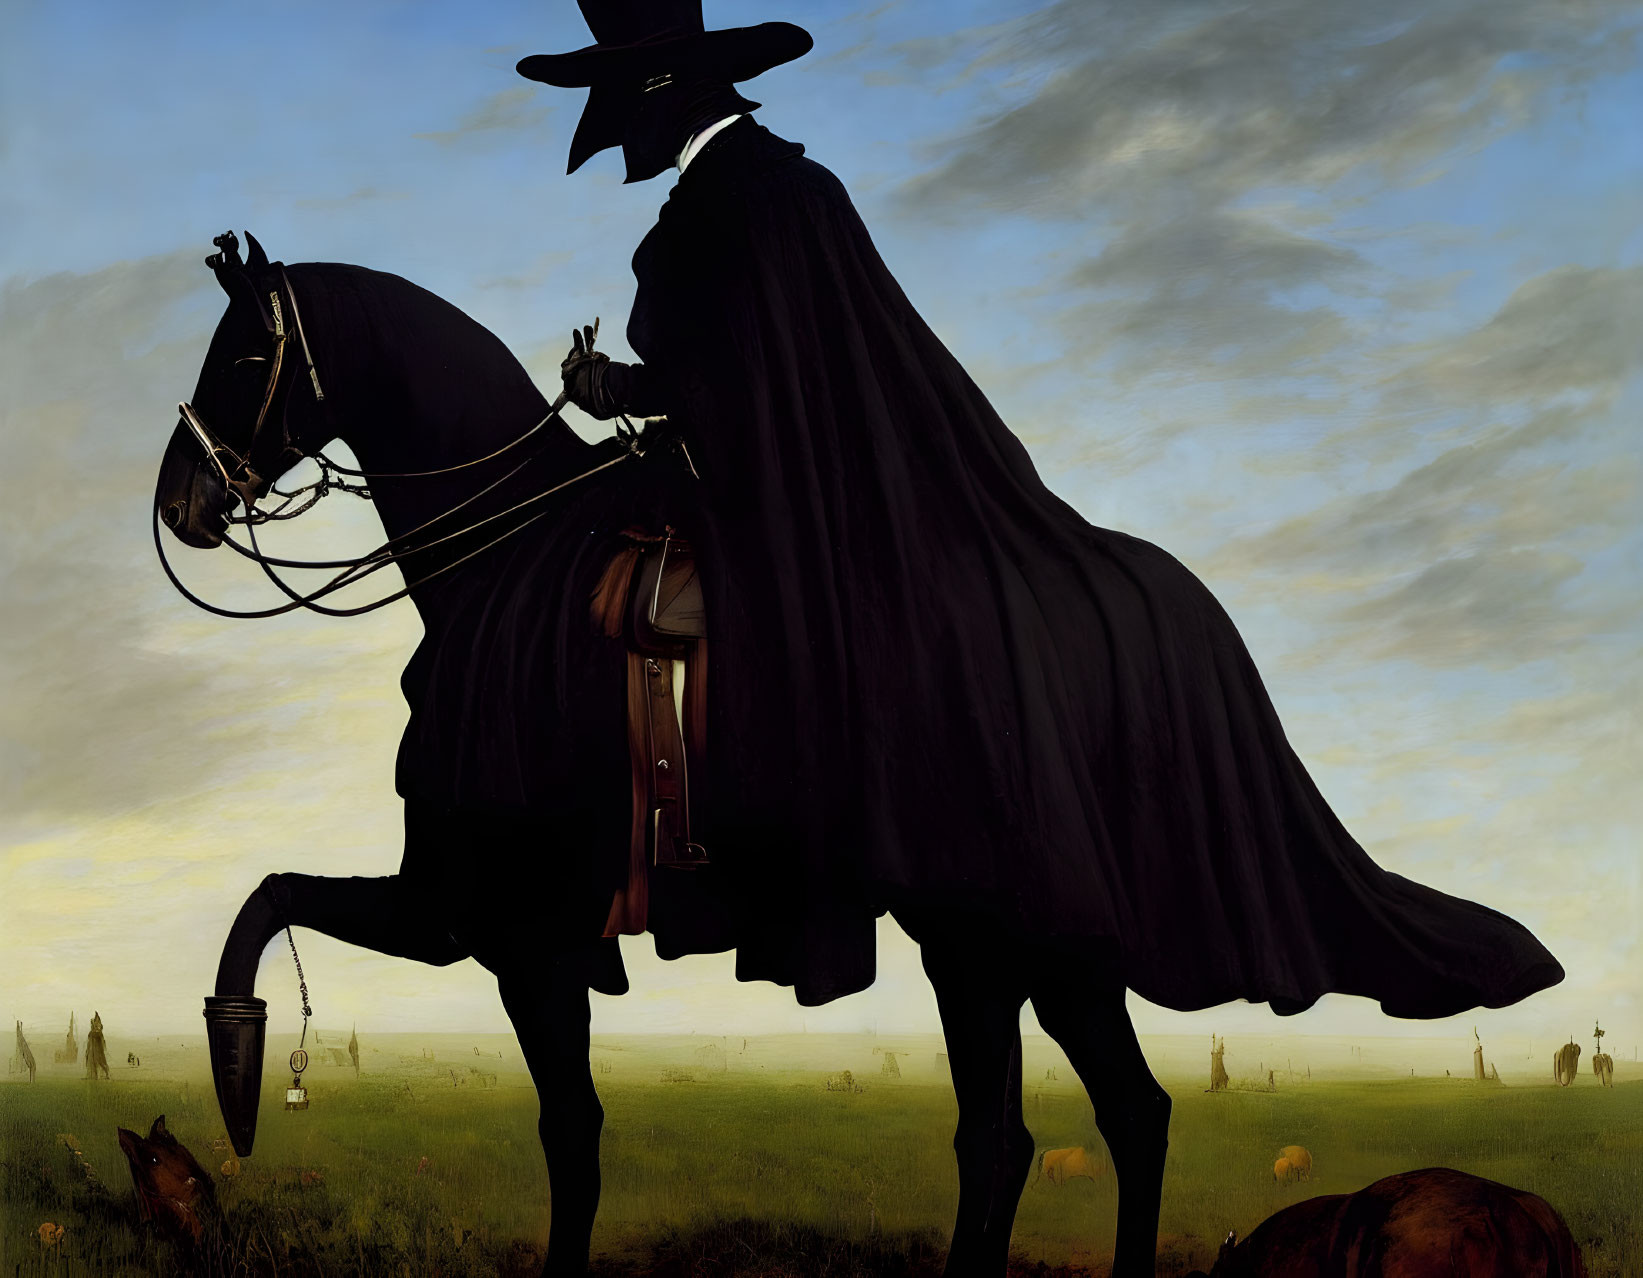 Silhouette of person in cape and hat riding horse at dusk